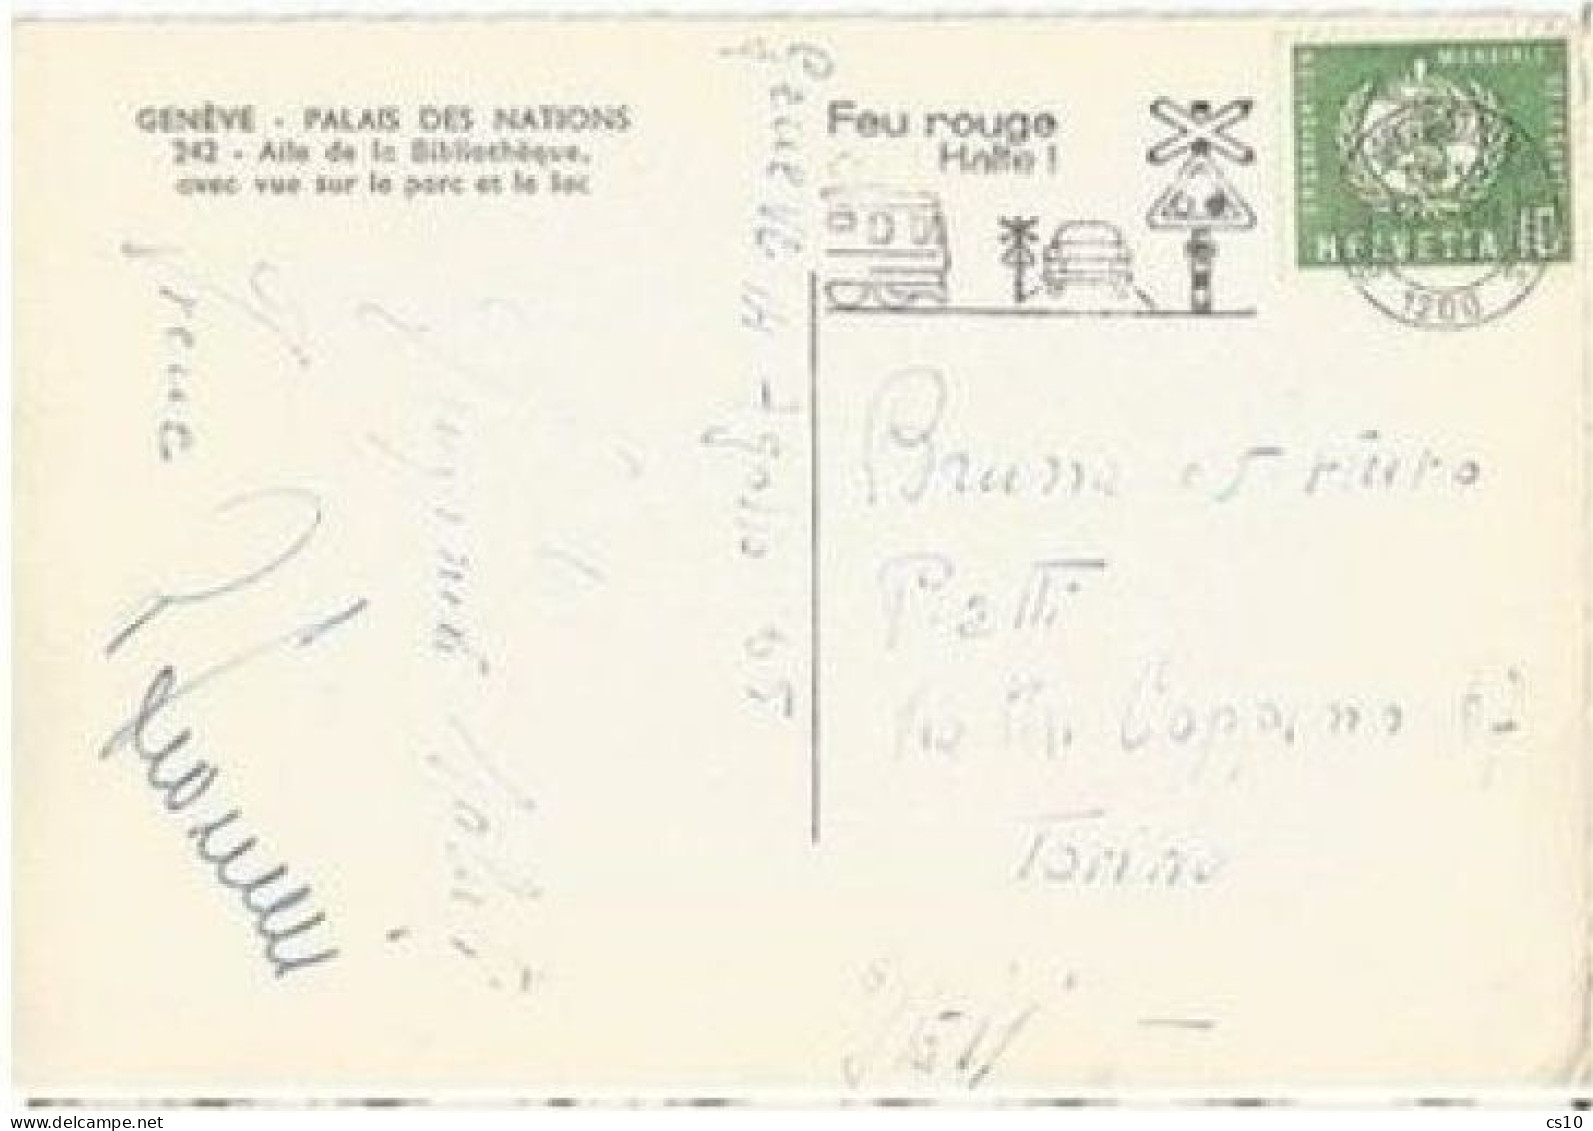 Suisse Service OMS-WHO Nations Unies C.10 Solo Franking Pcard Geneve 13aug1965 Official Cachet X Italy - Brieven En Documenten